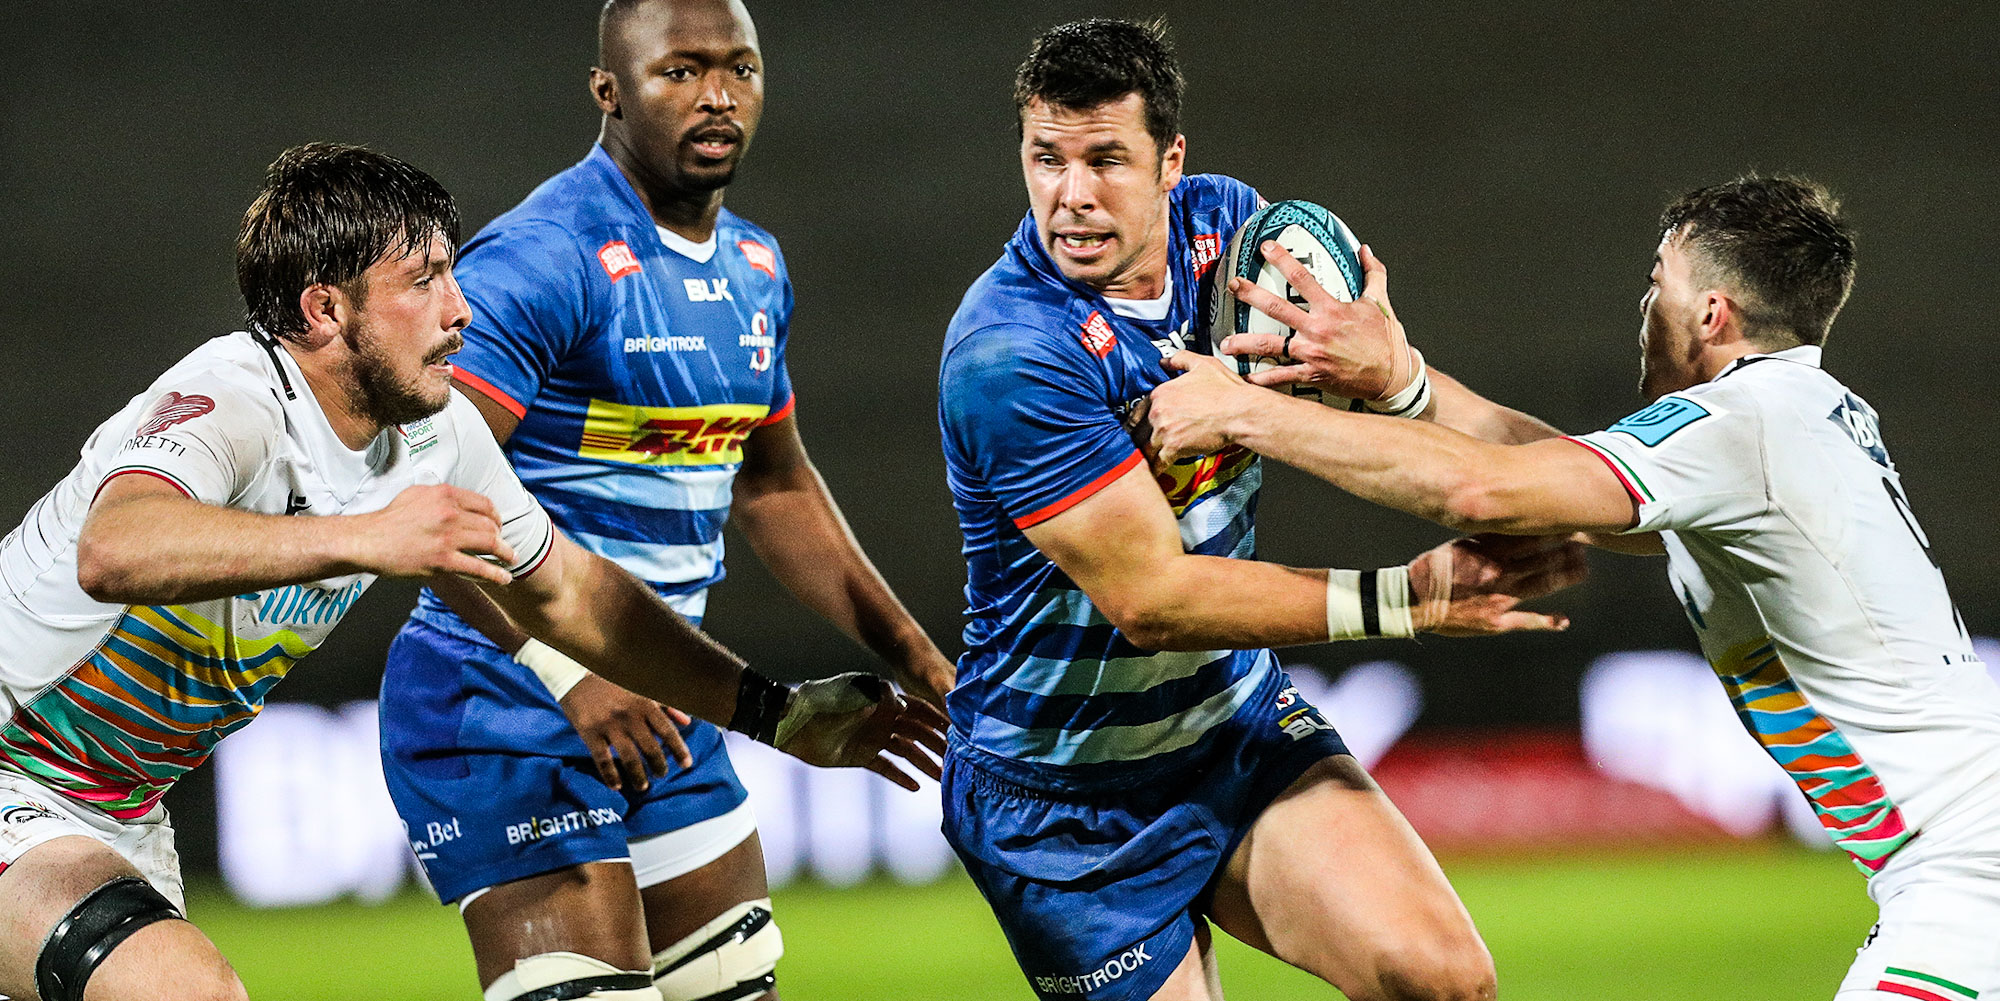 The DHL Stormers will be looking to build on their impressive win over Zebre Parma last weekend.